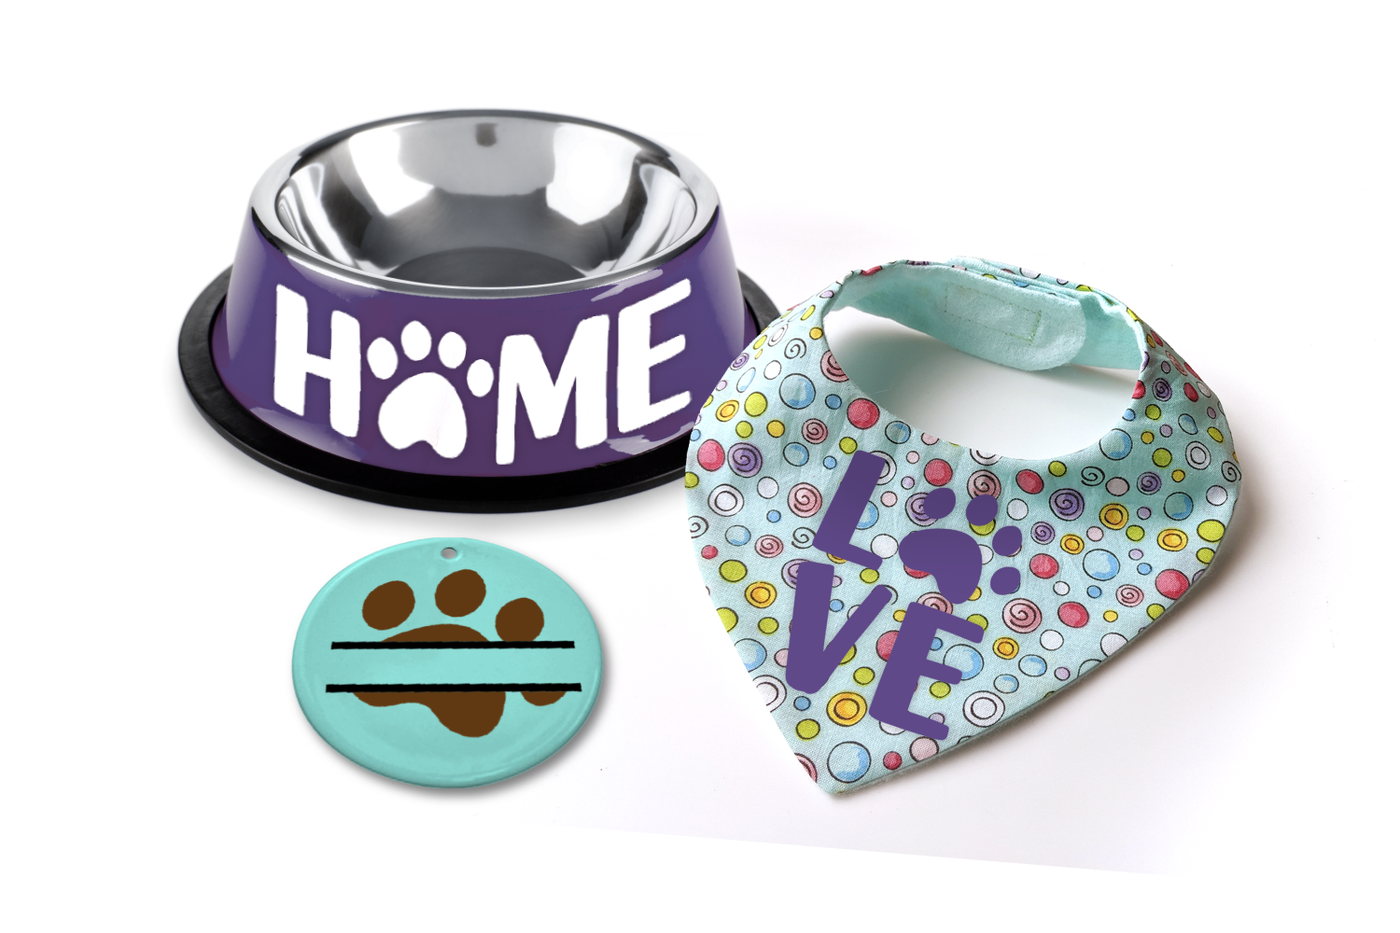 Dog bowl that says "home" with a paw print for the O, bandanna that says "LOVE" with a paw print for the O, and an ornament with a dog paw print split design.